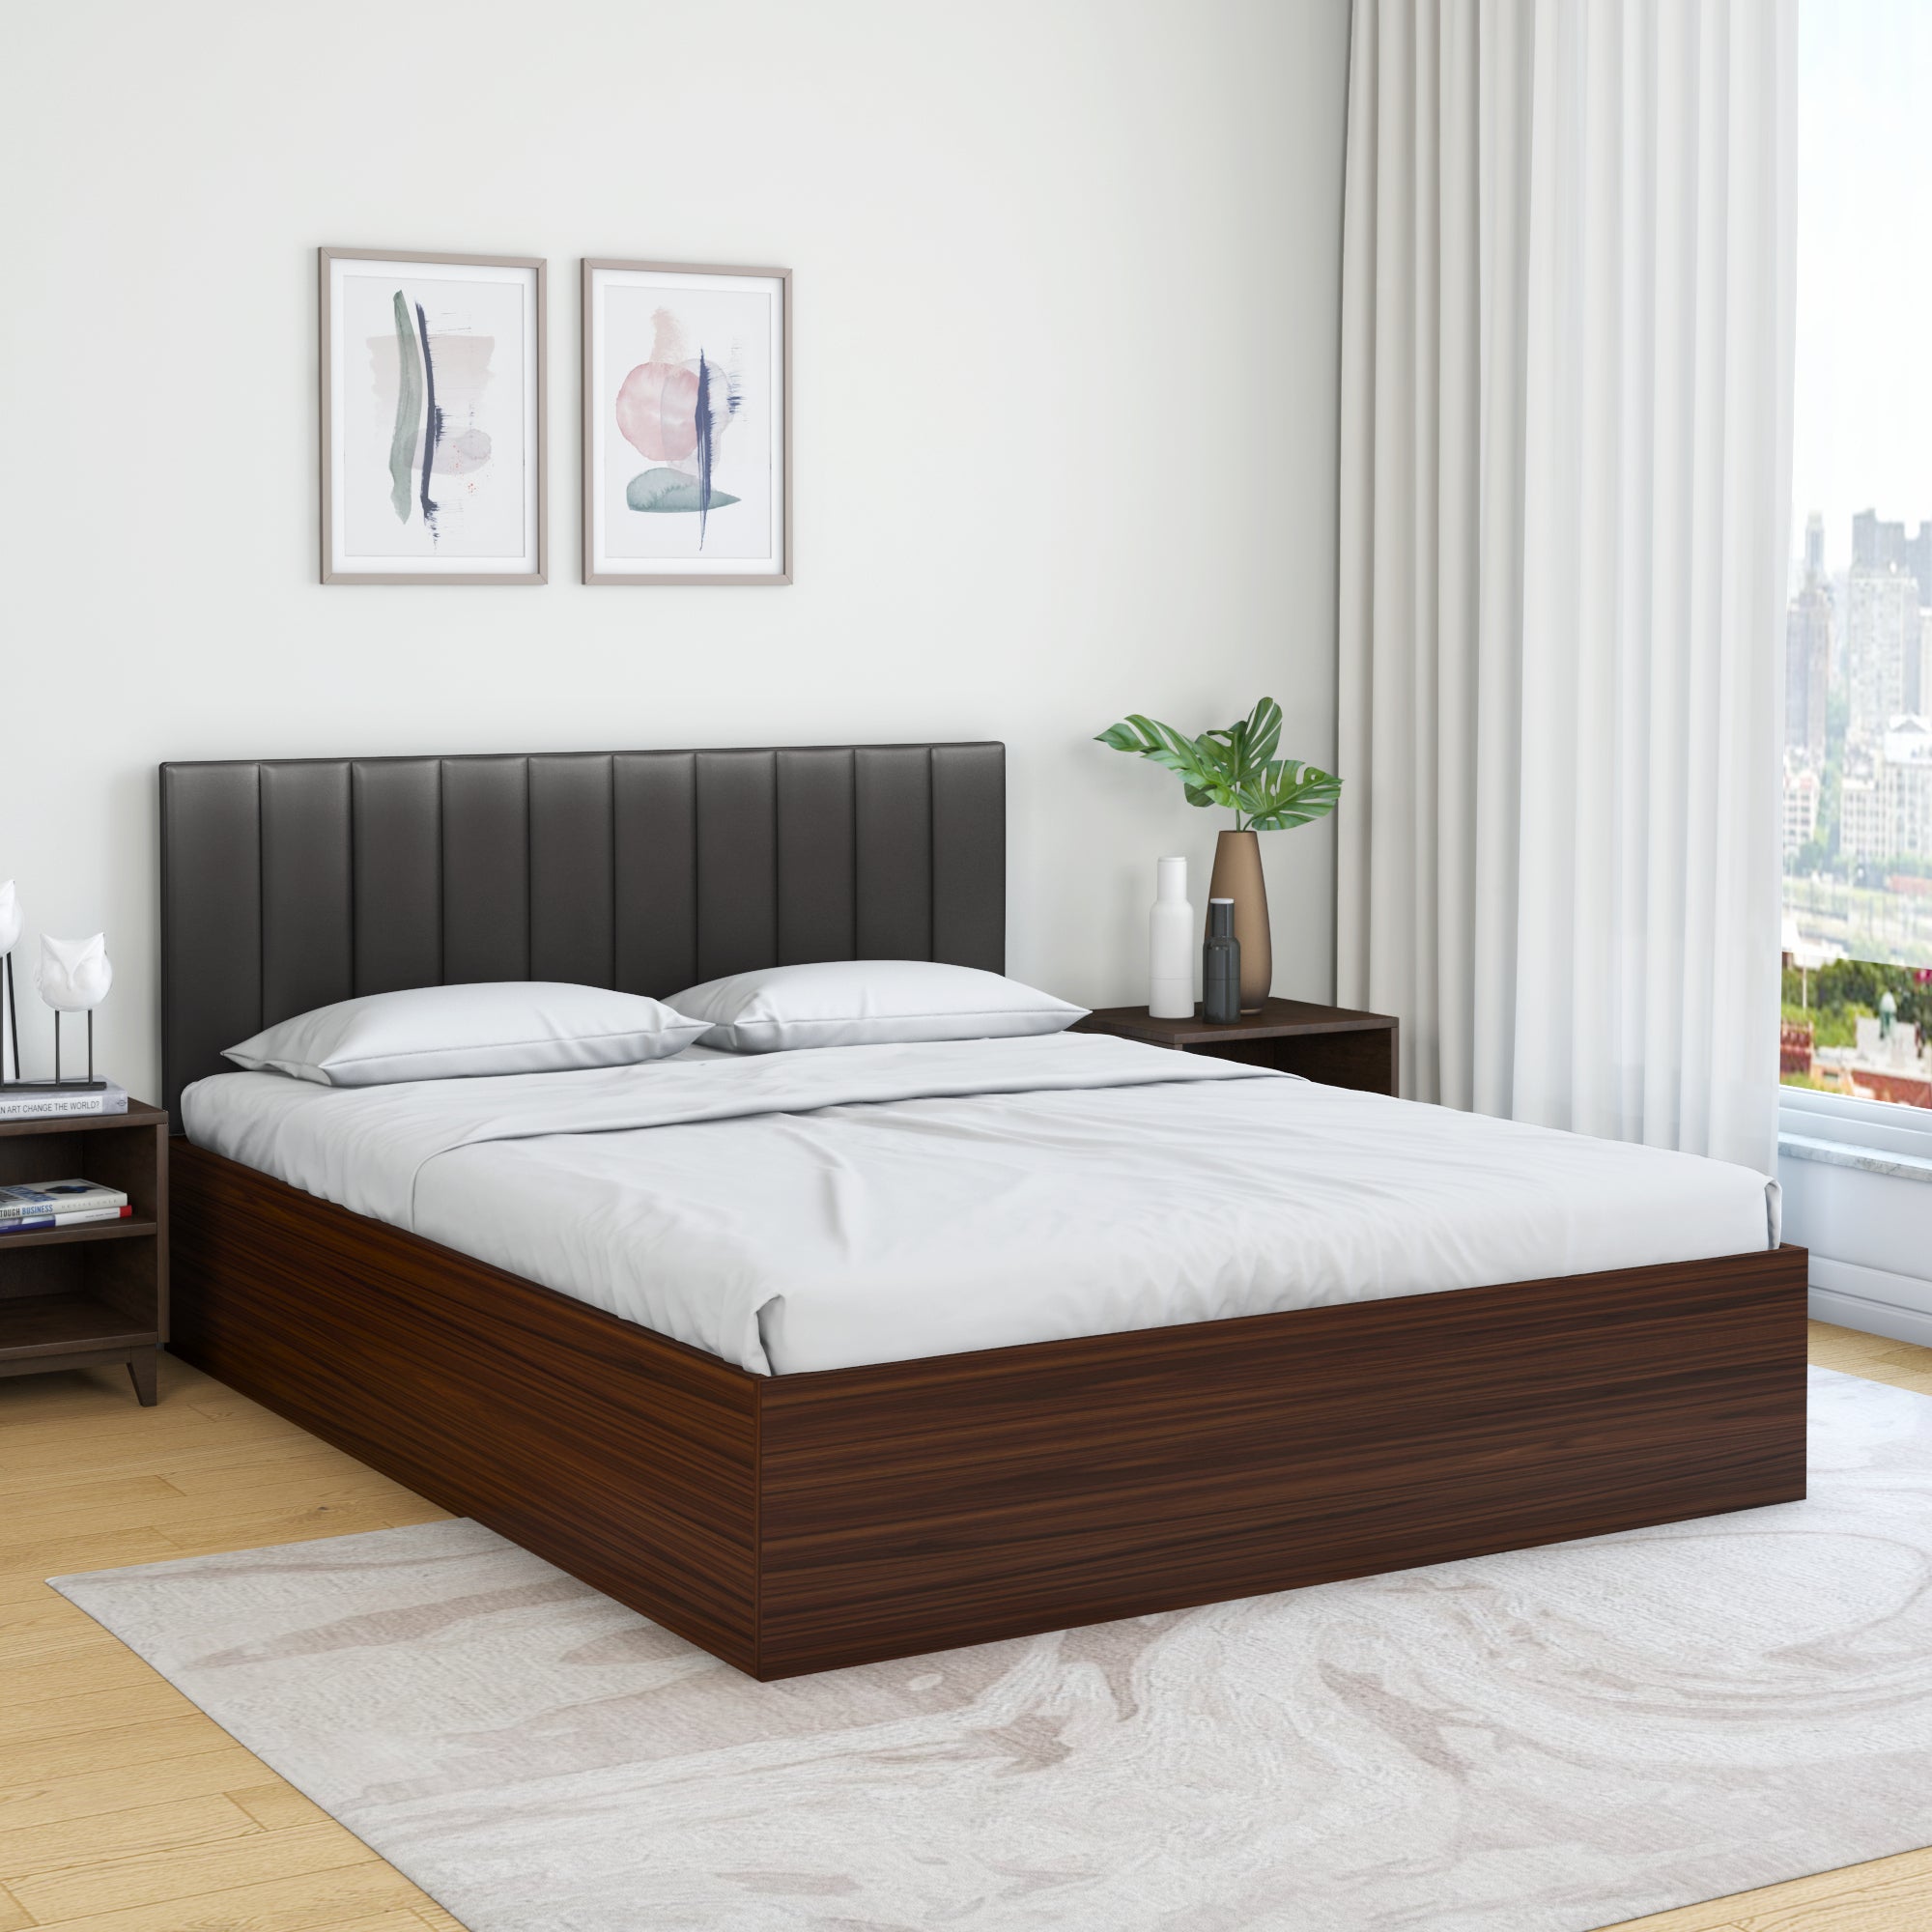 Fusion Upholstered Wall Mounted Headboard Engineered Wood Queen Bed with Box Storage (Grey & Walnut)